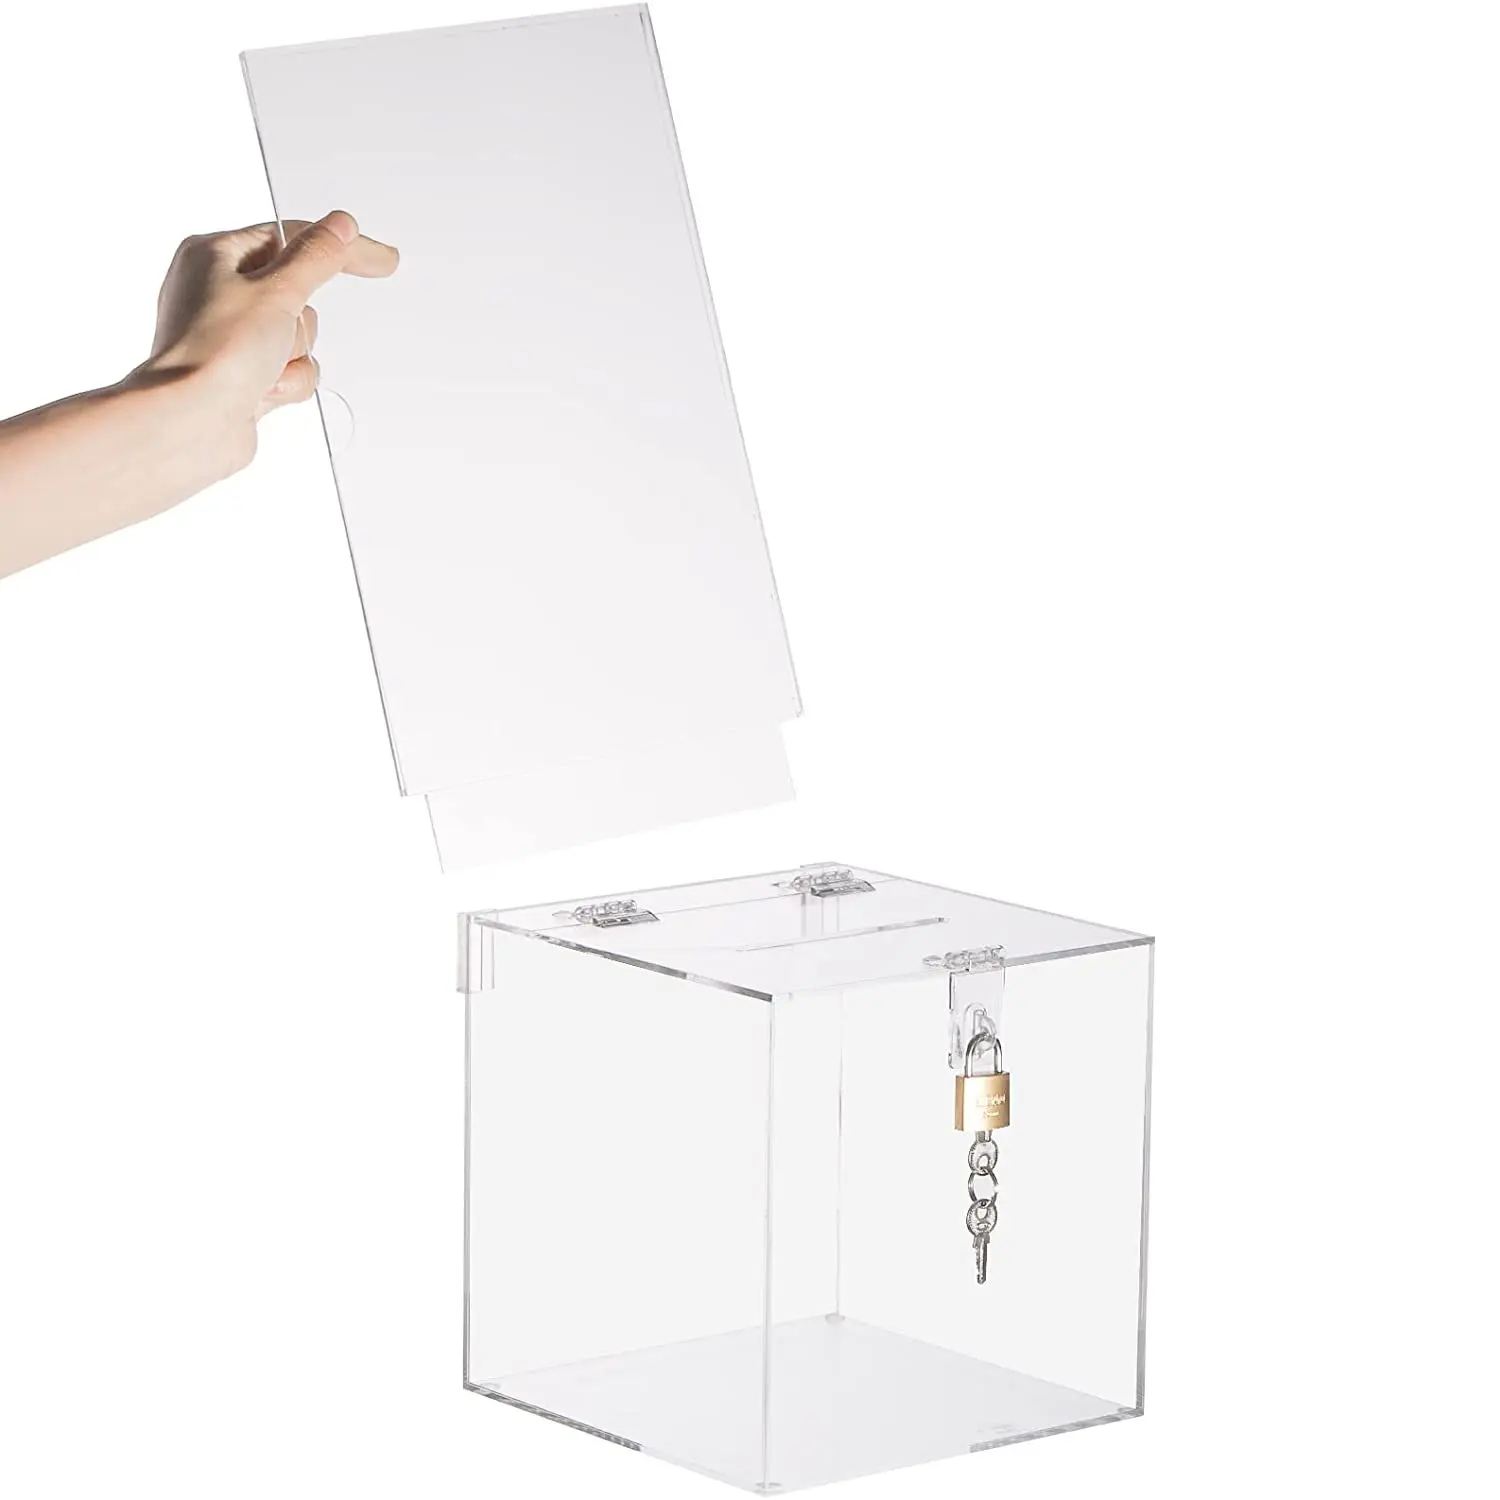 Square Acrylic Donation Box with Lock and Sign Holder Clear Ticket Comment Box for Voting Charity Suggestion Collection